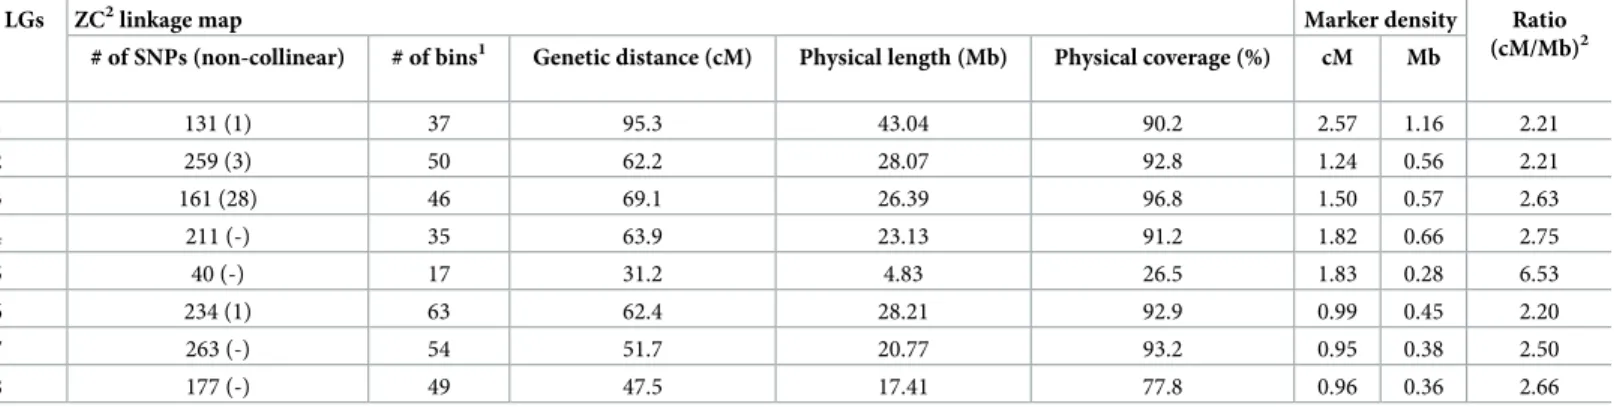 Table 2. Comparison of the ZC 2 linkage map with the peach physical map v 2.0.